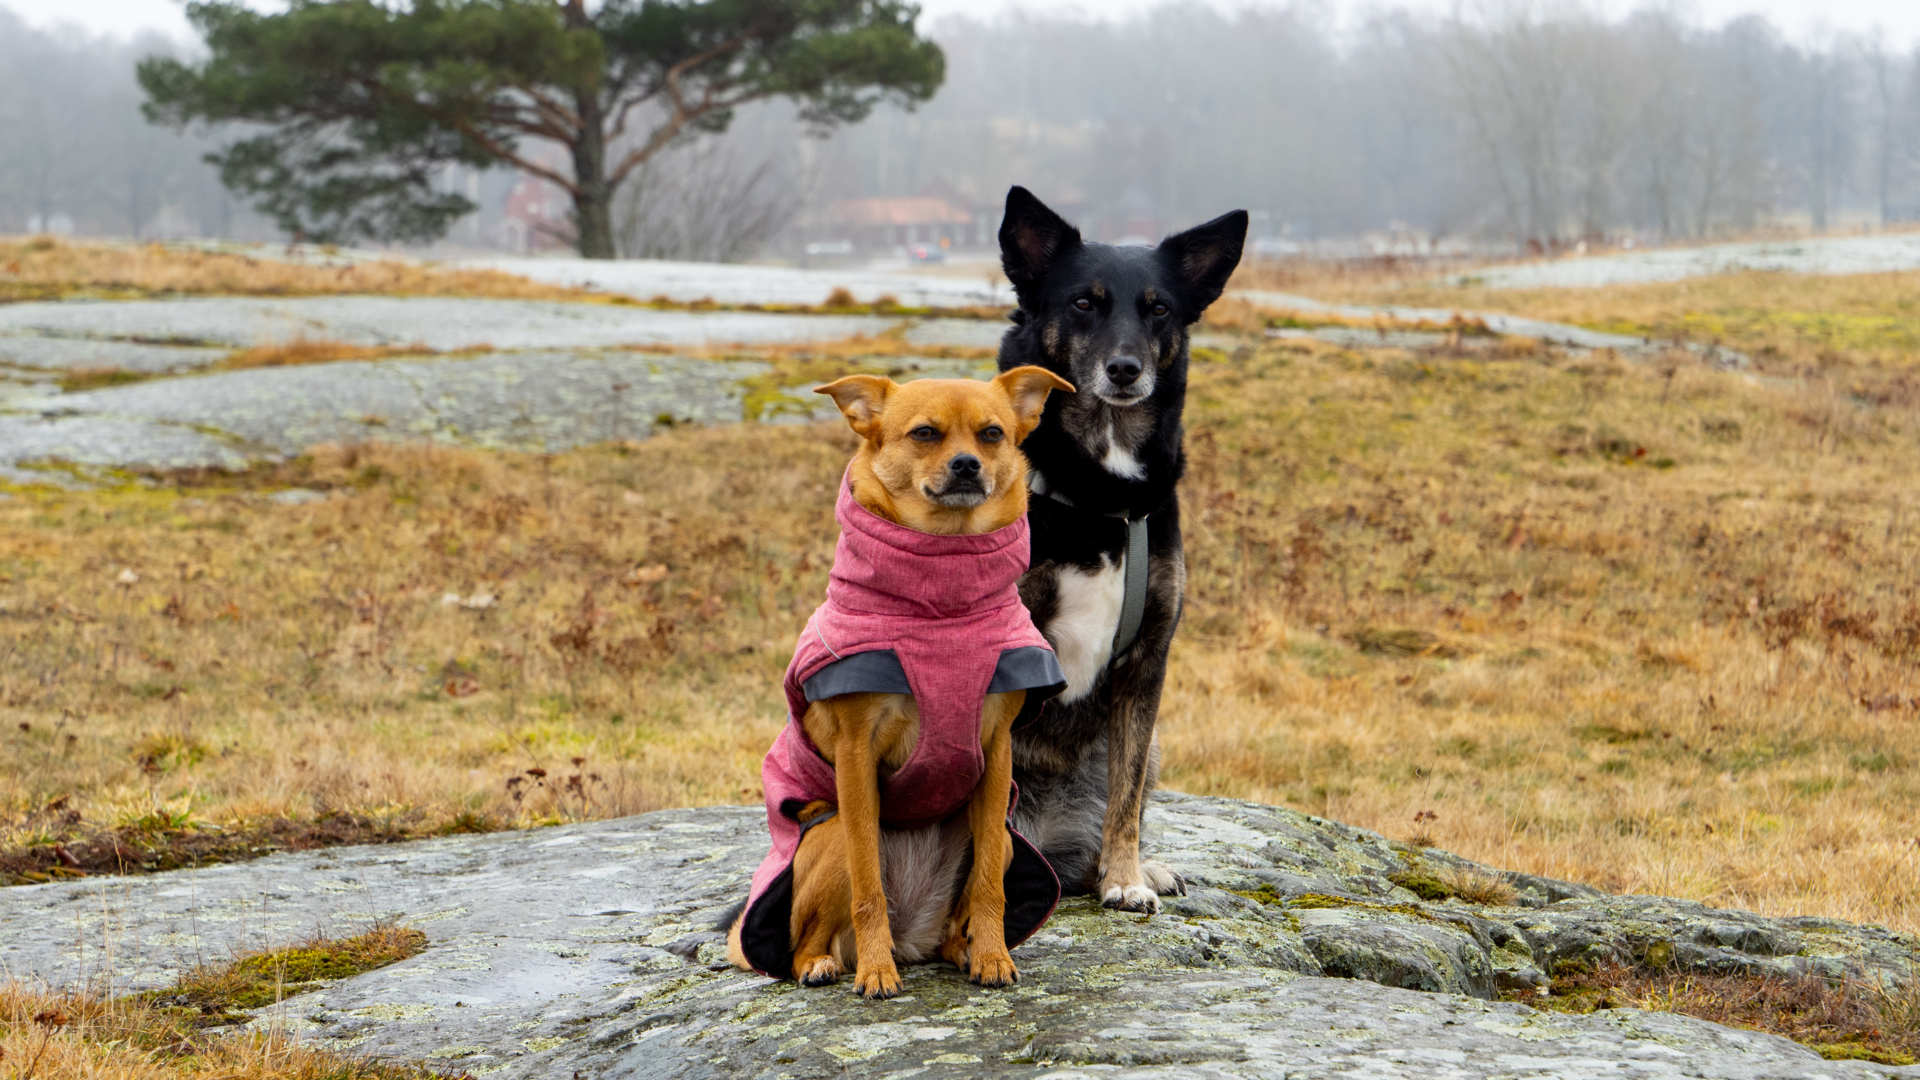 Finding Dog-Friendly Hiking Groups in Your Area